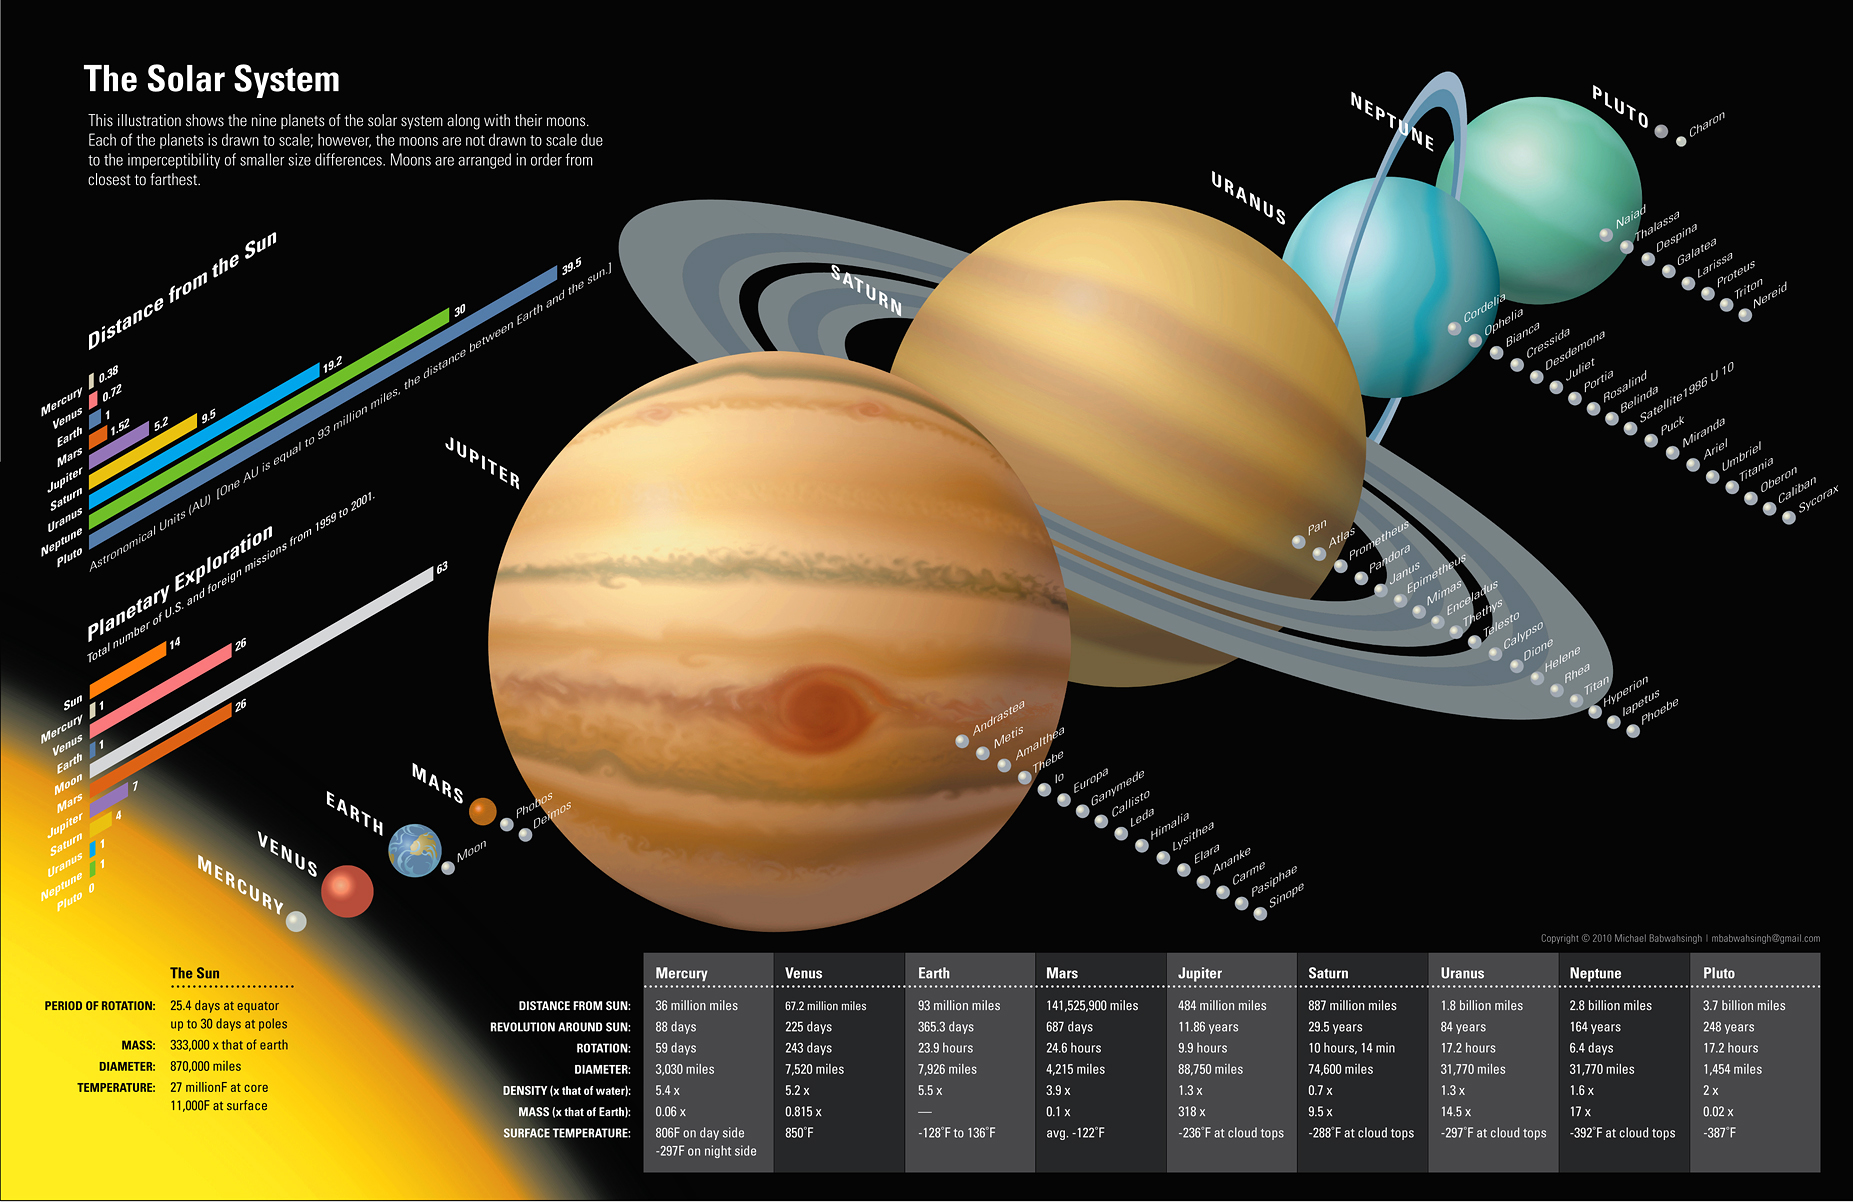 Dwarf Planets of Our Solar System (Infographic)